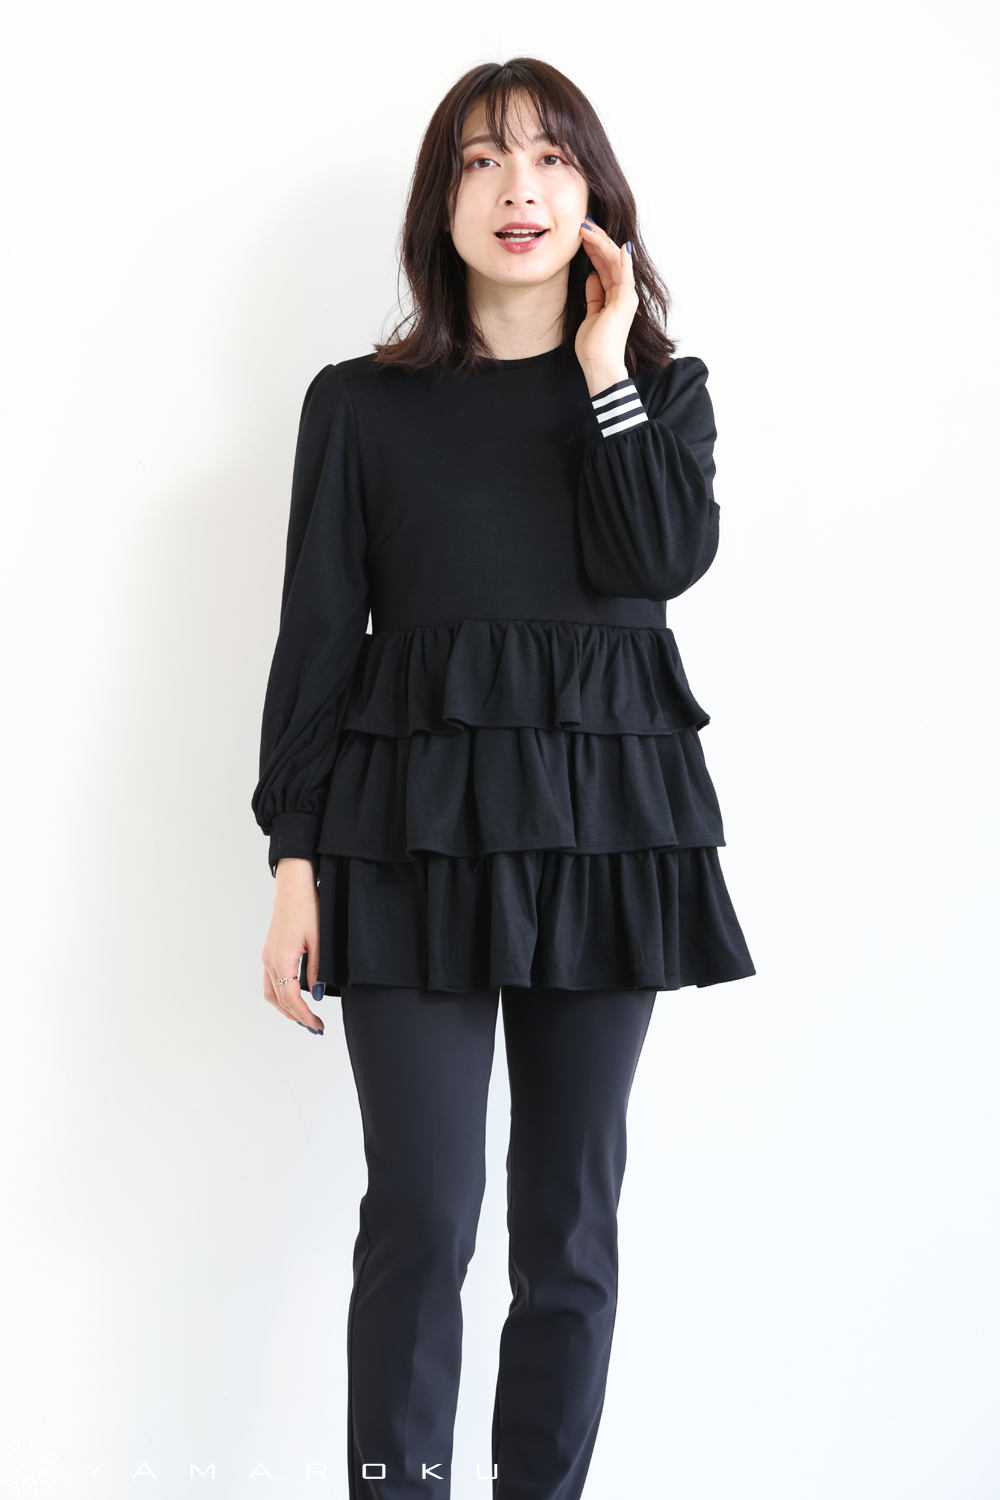 BORDERS at BALCONY(ボーダーズアットバルコニー) WEEKEND TIERED TOP、GATHERED SKIRT